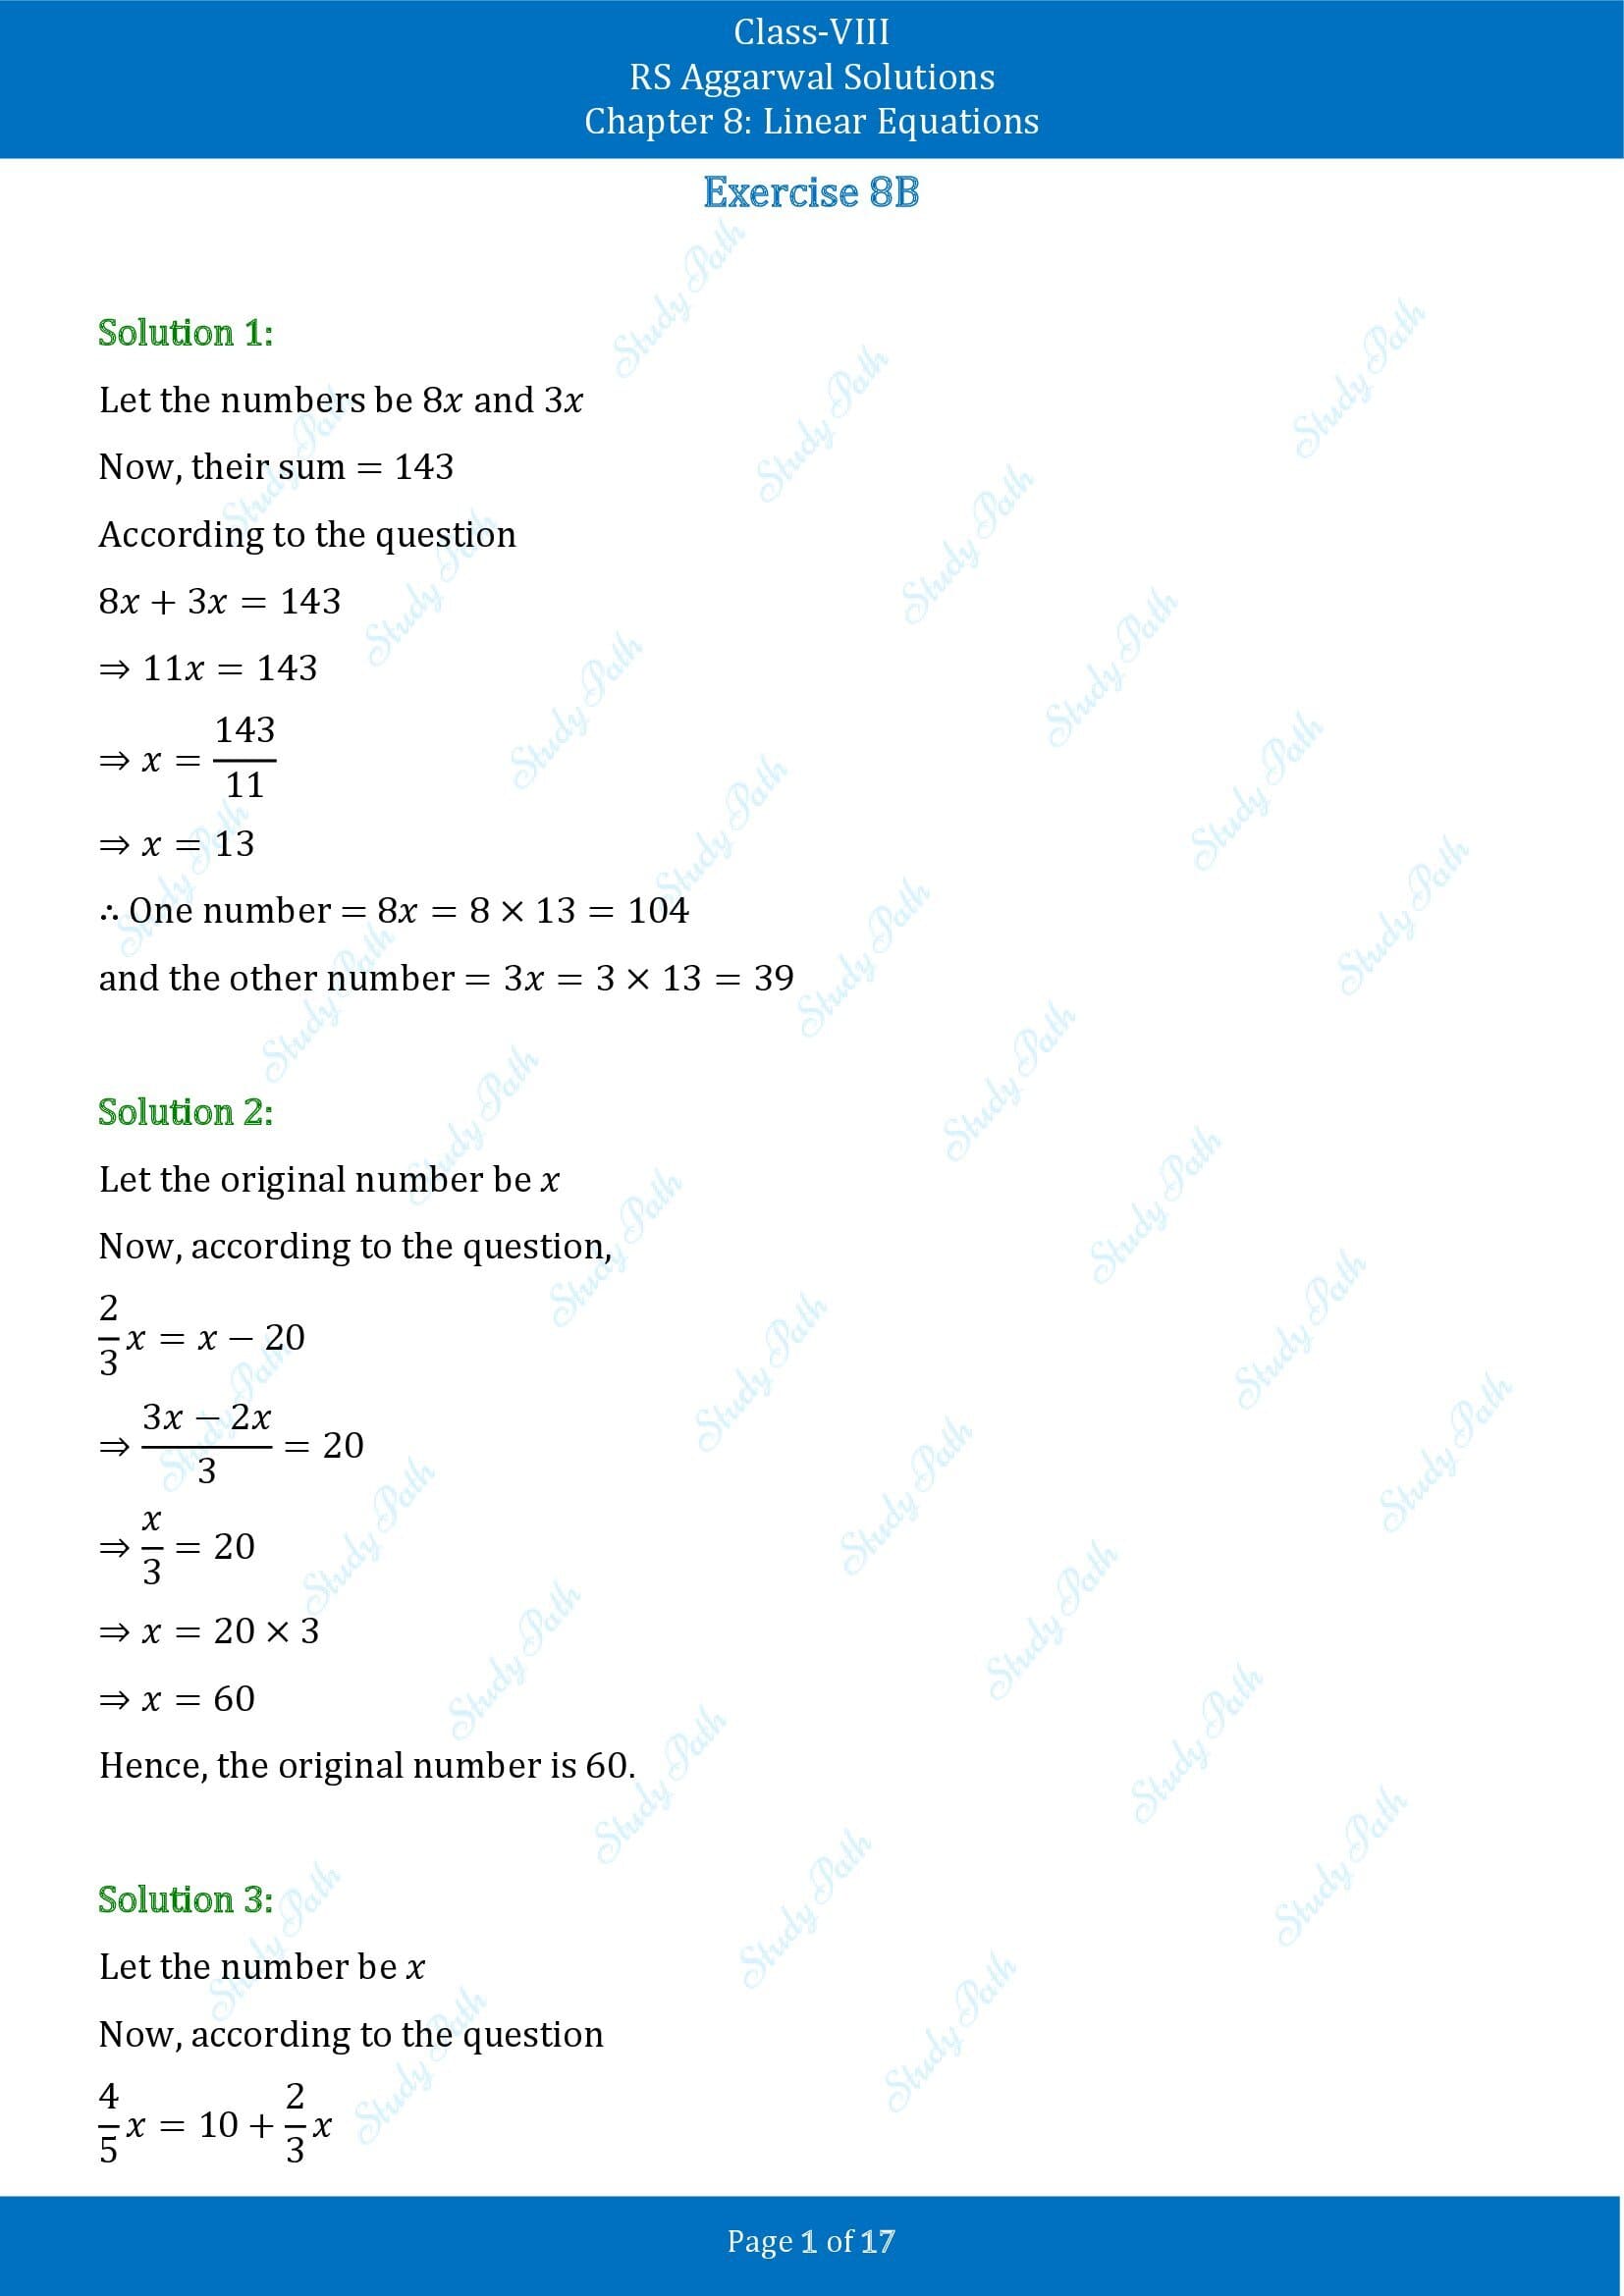 RS Aggarwal Solutions Class 8 Chapter 8 Linear Equations Exercise 8B 00001